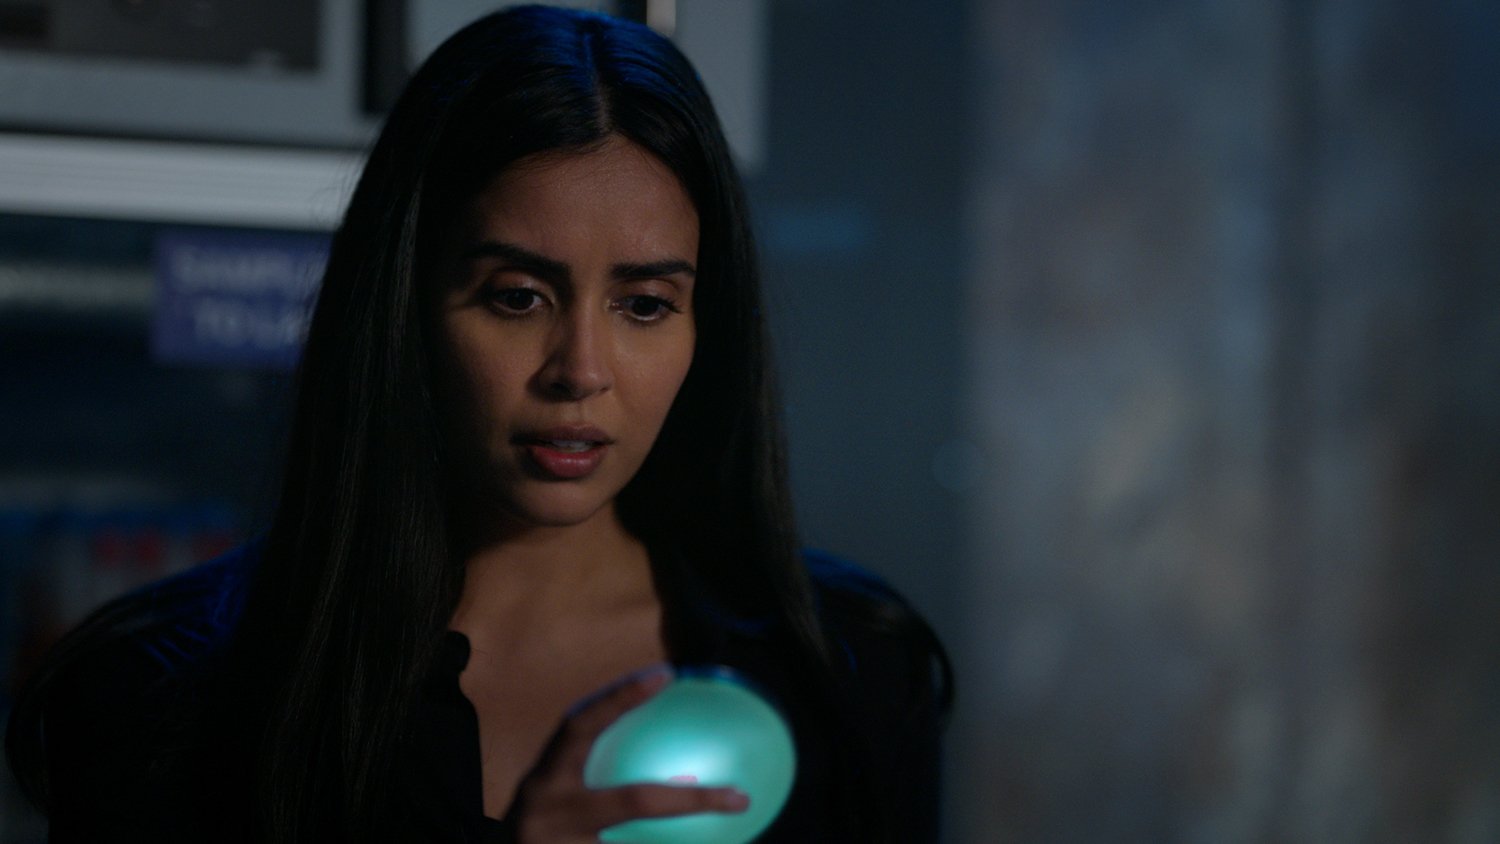 Parveen Kaur as Saanvi Bahl holding a glowing dish as part of a Calling in Manifest Season 4 Part 1